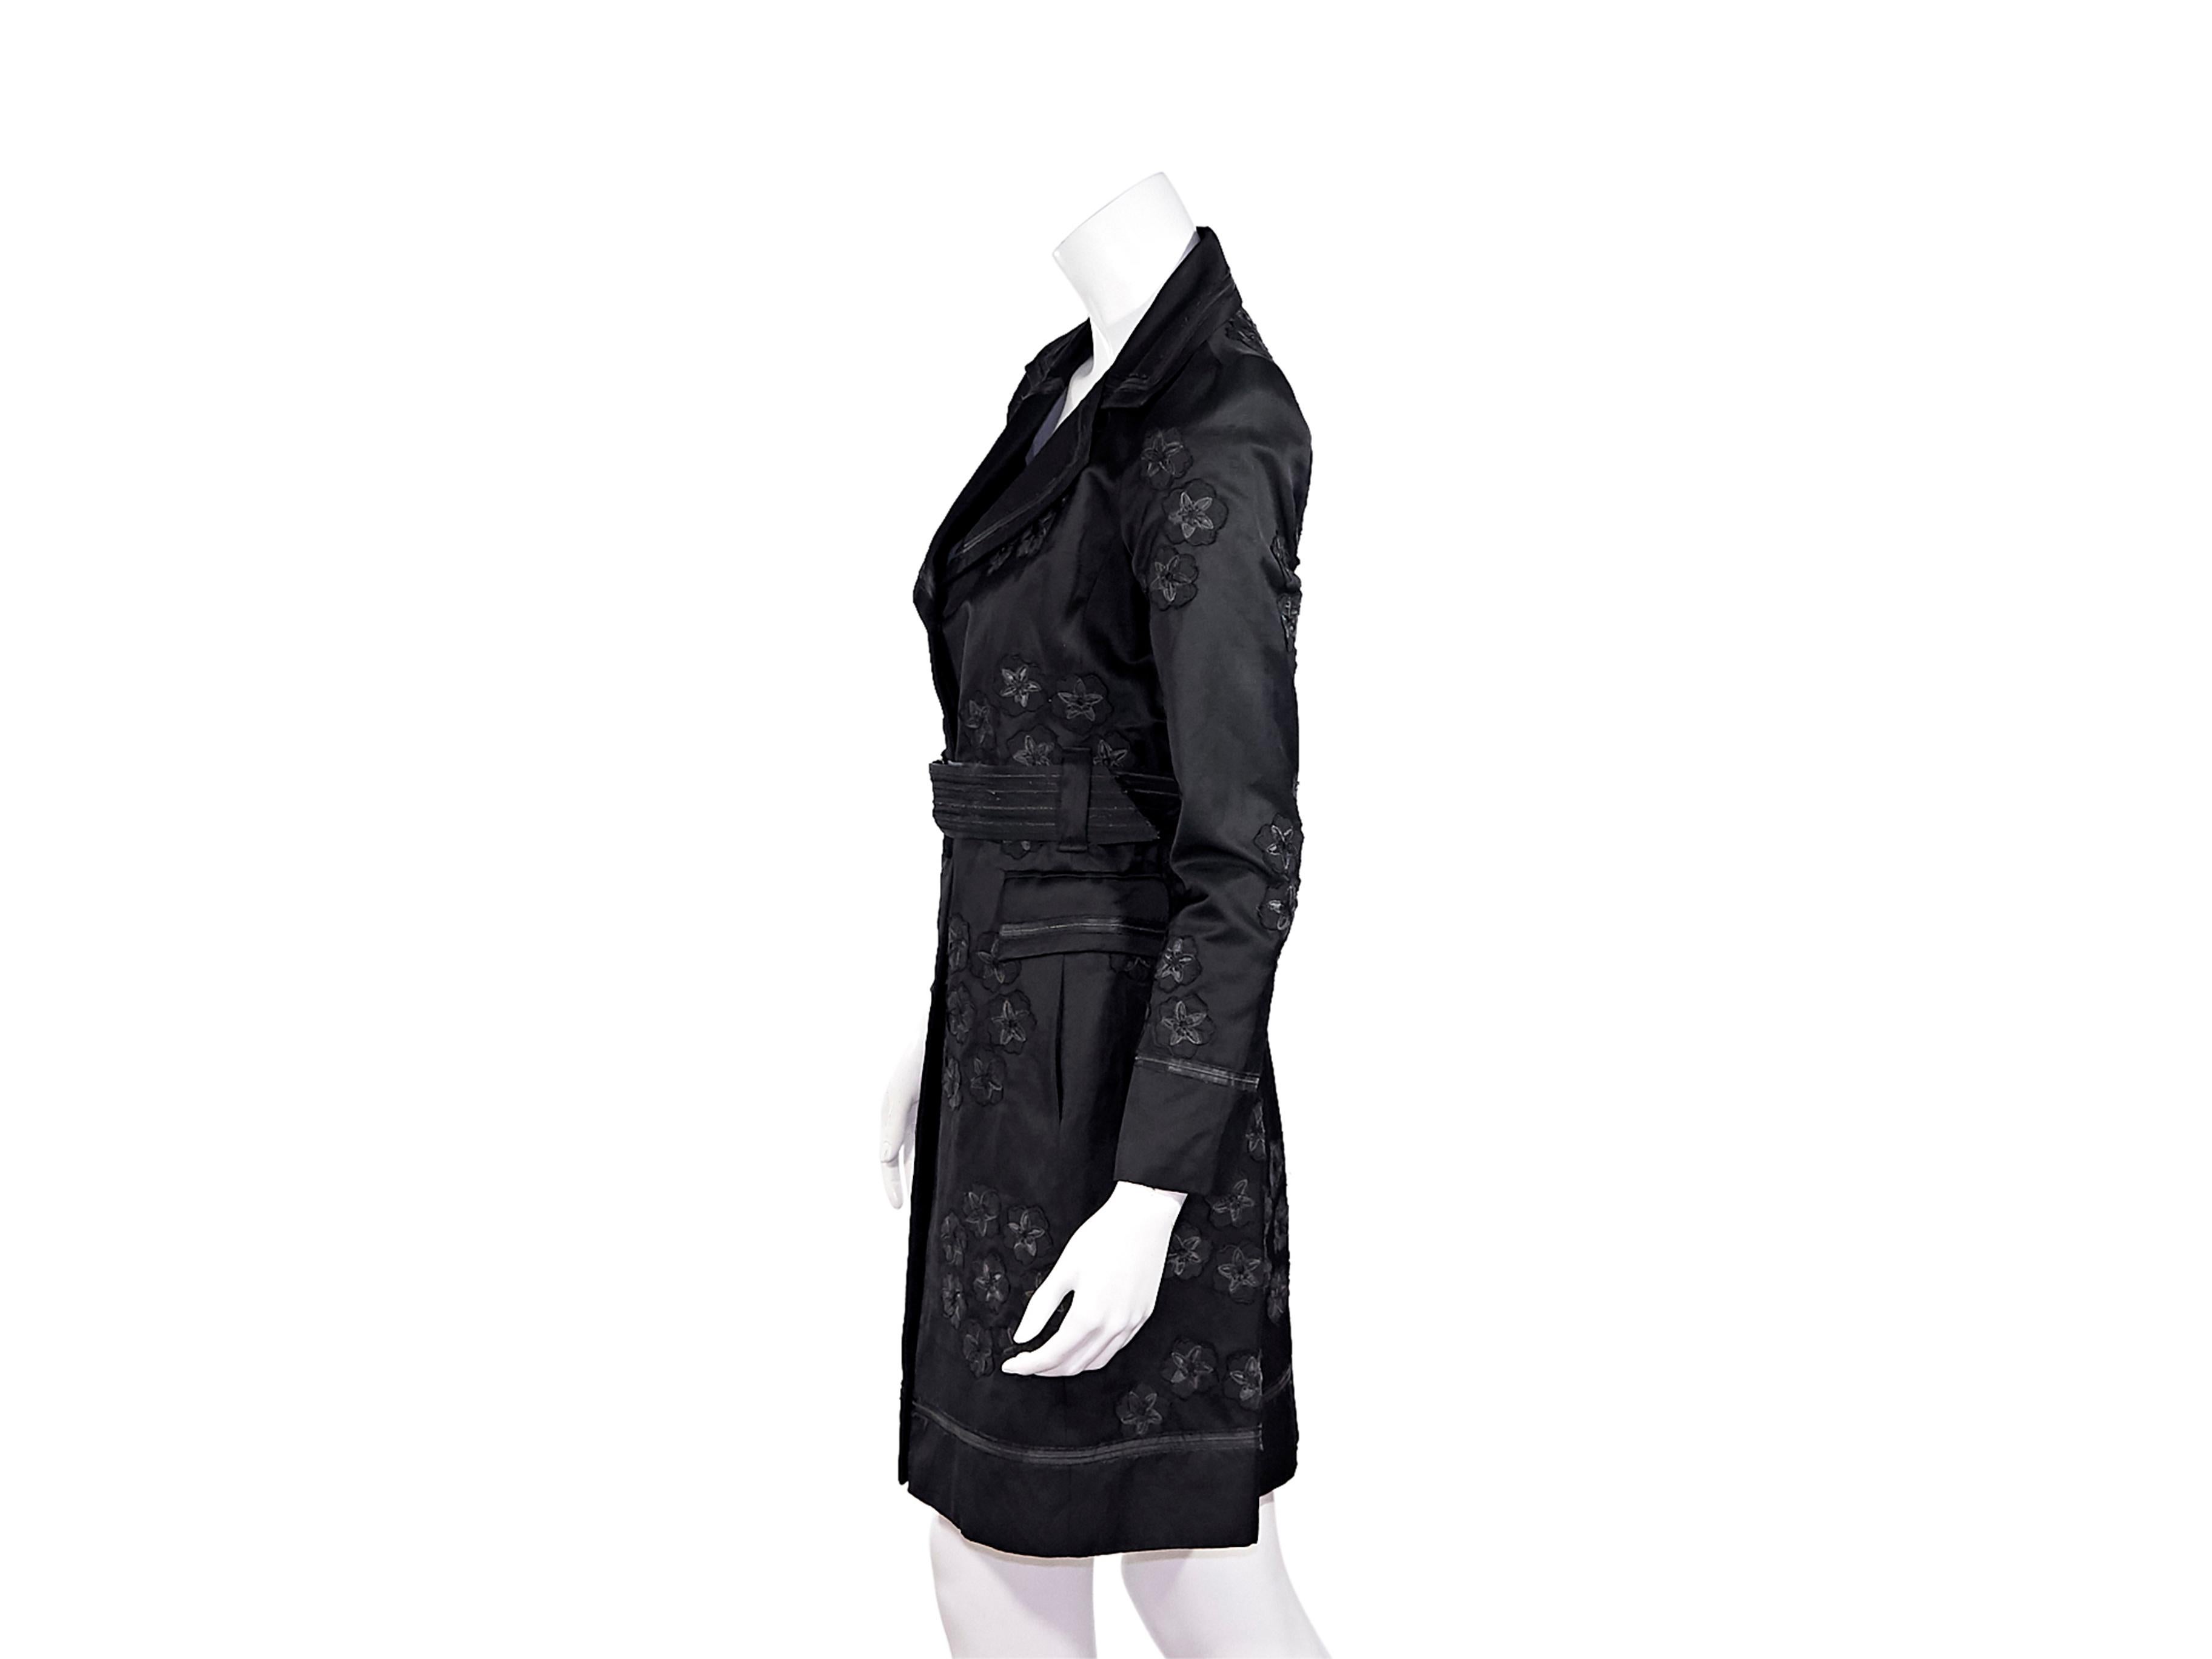 Product details:  Black linen-blend trench coat by Biya.  Adorn with floral applique.  Notched lapel.  Long sleeves.  Button-front closure.  Adjustable belted waist.  Waist flap pockets.  40